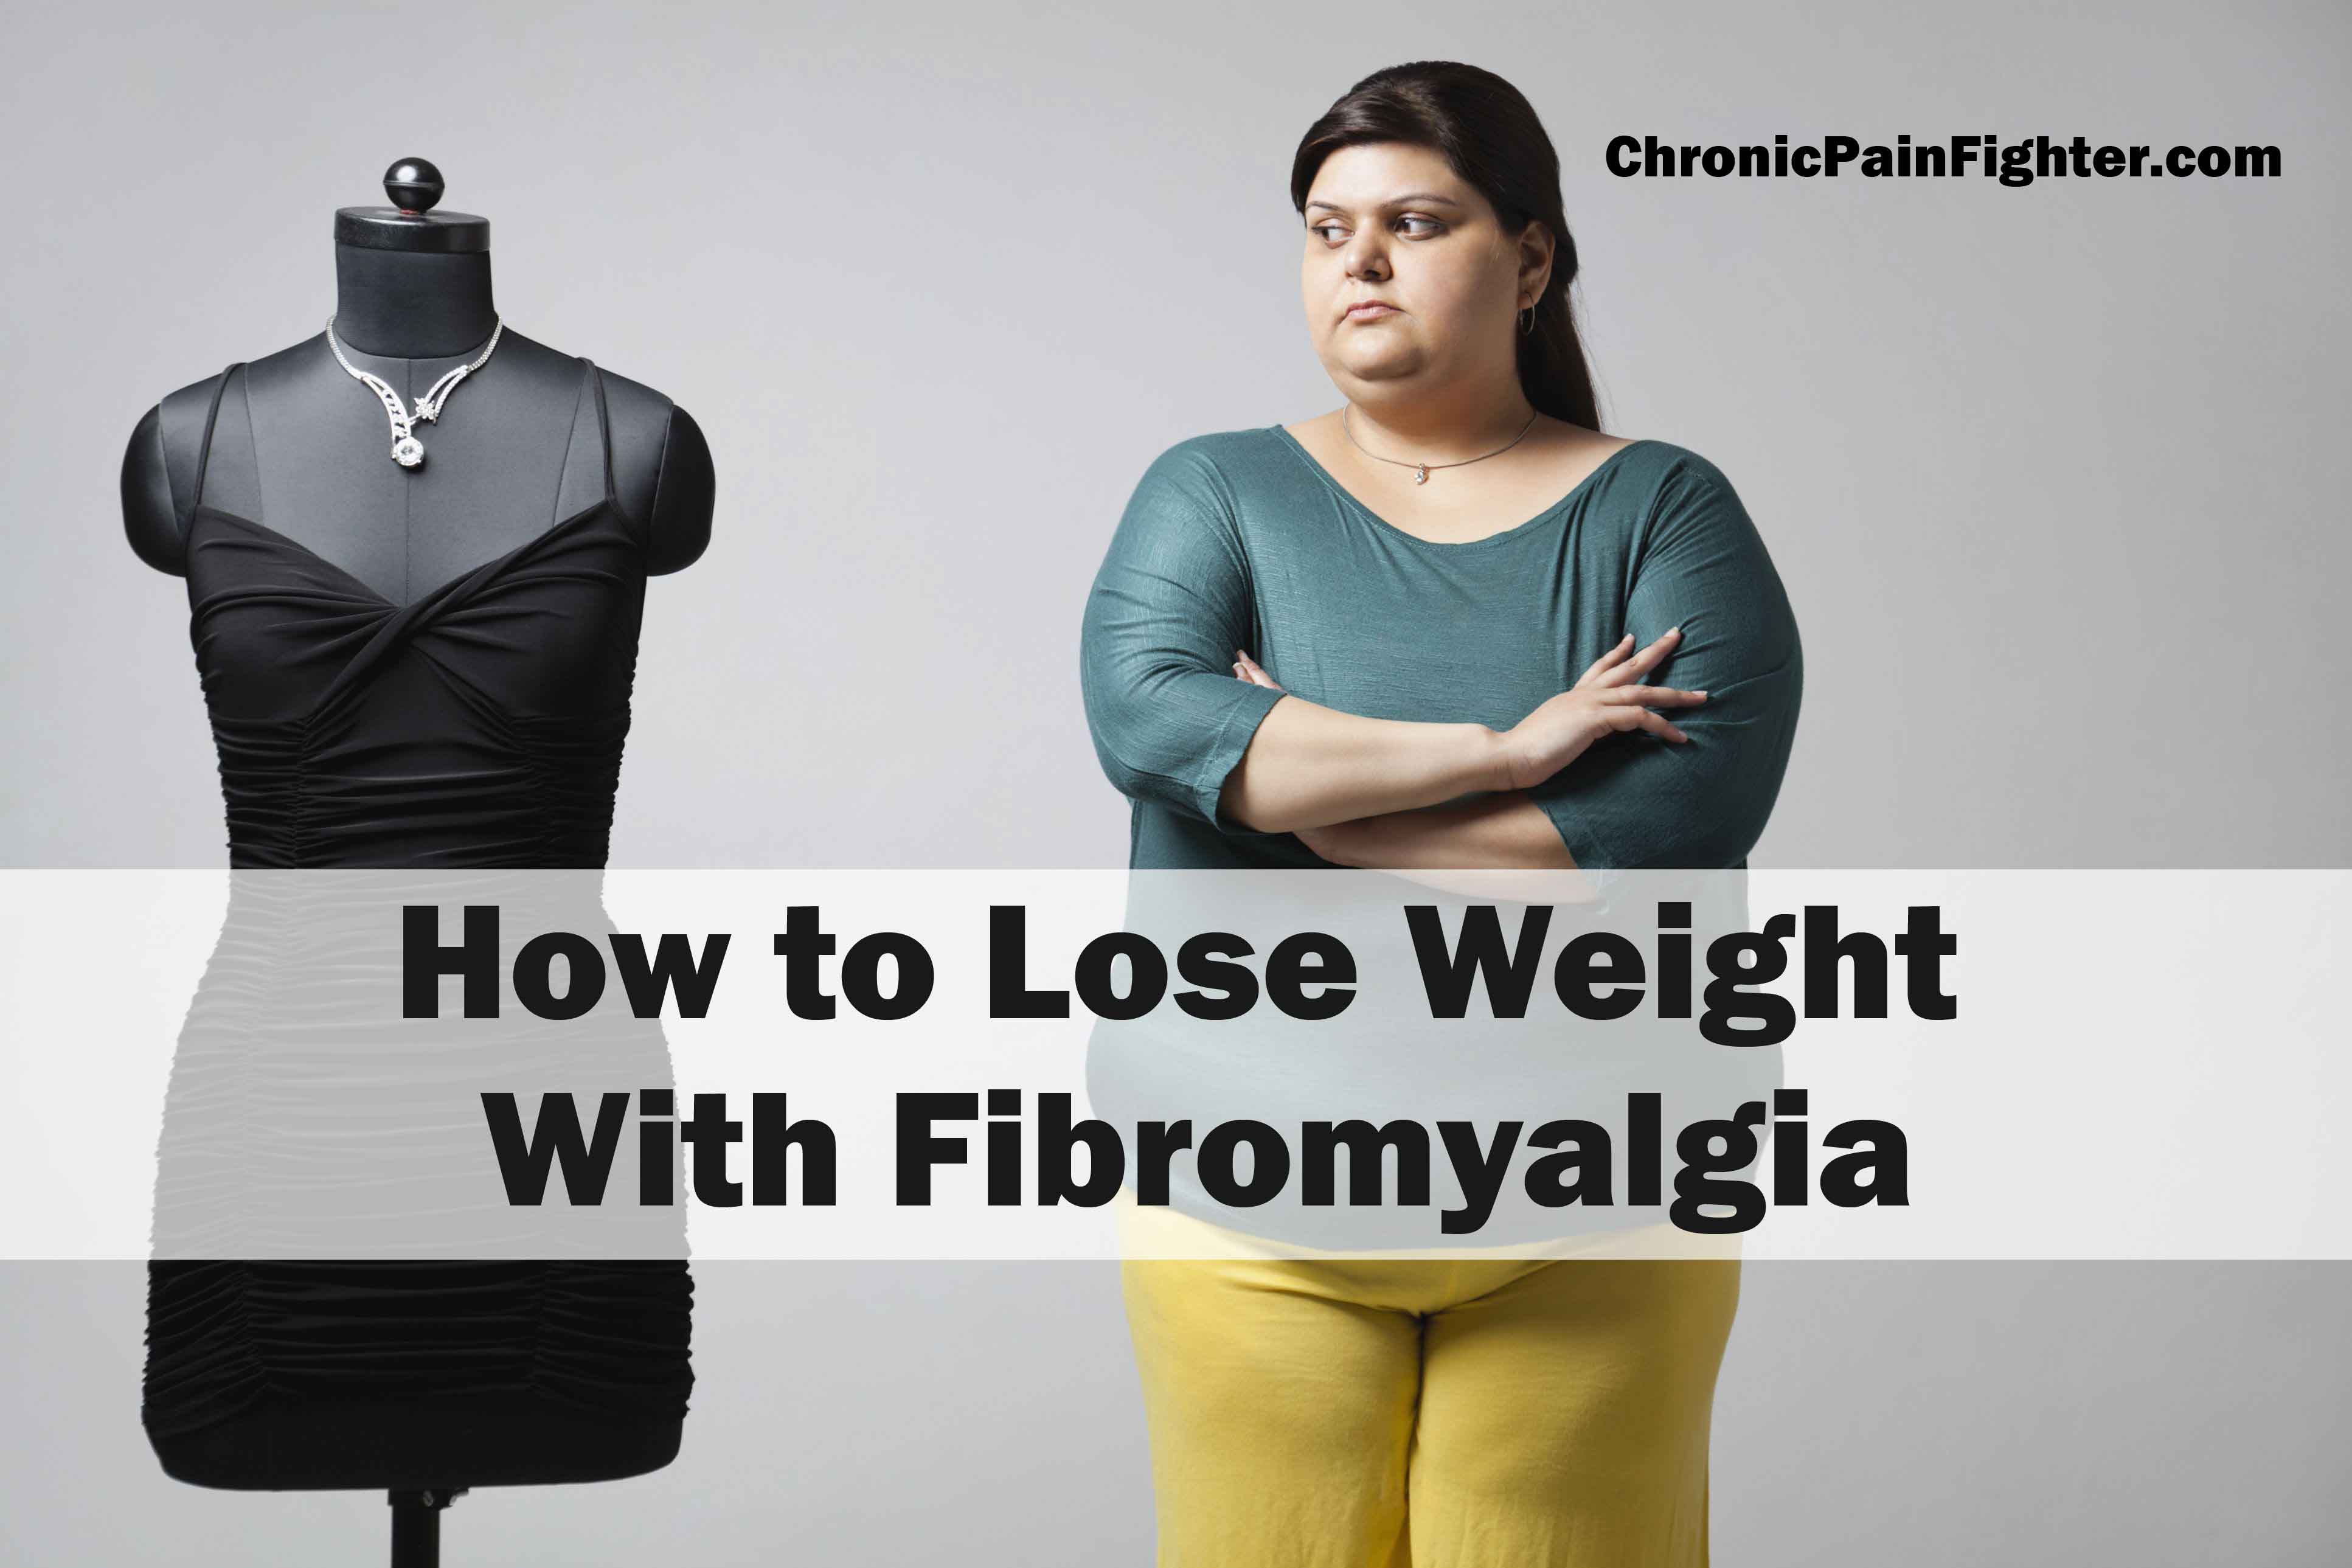 How to Lose Weight With Fibromyalgia